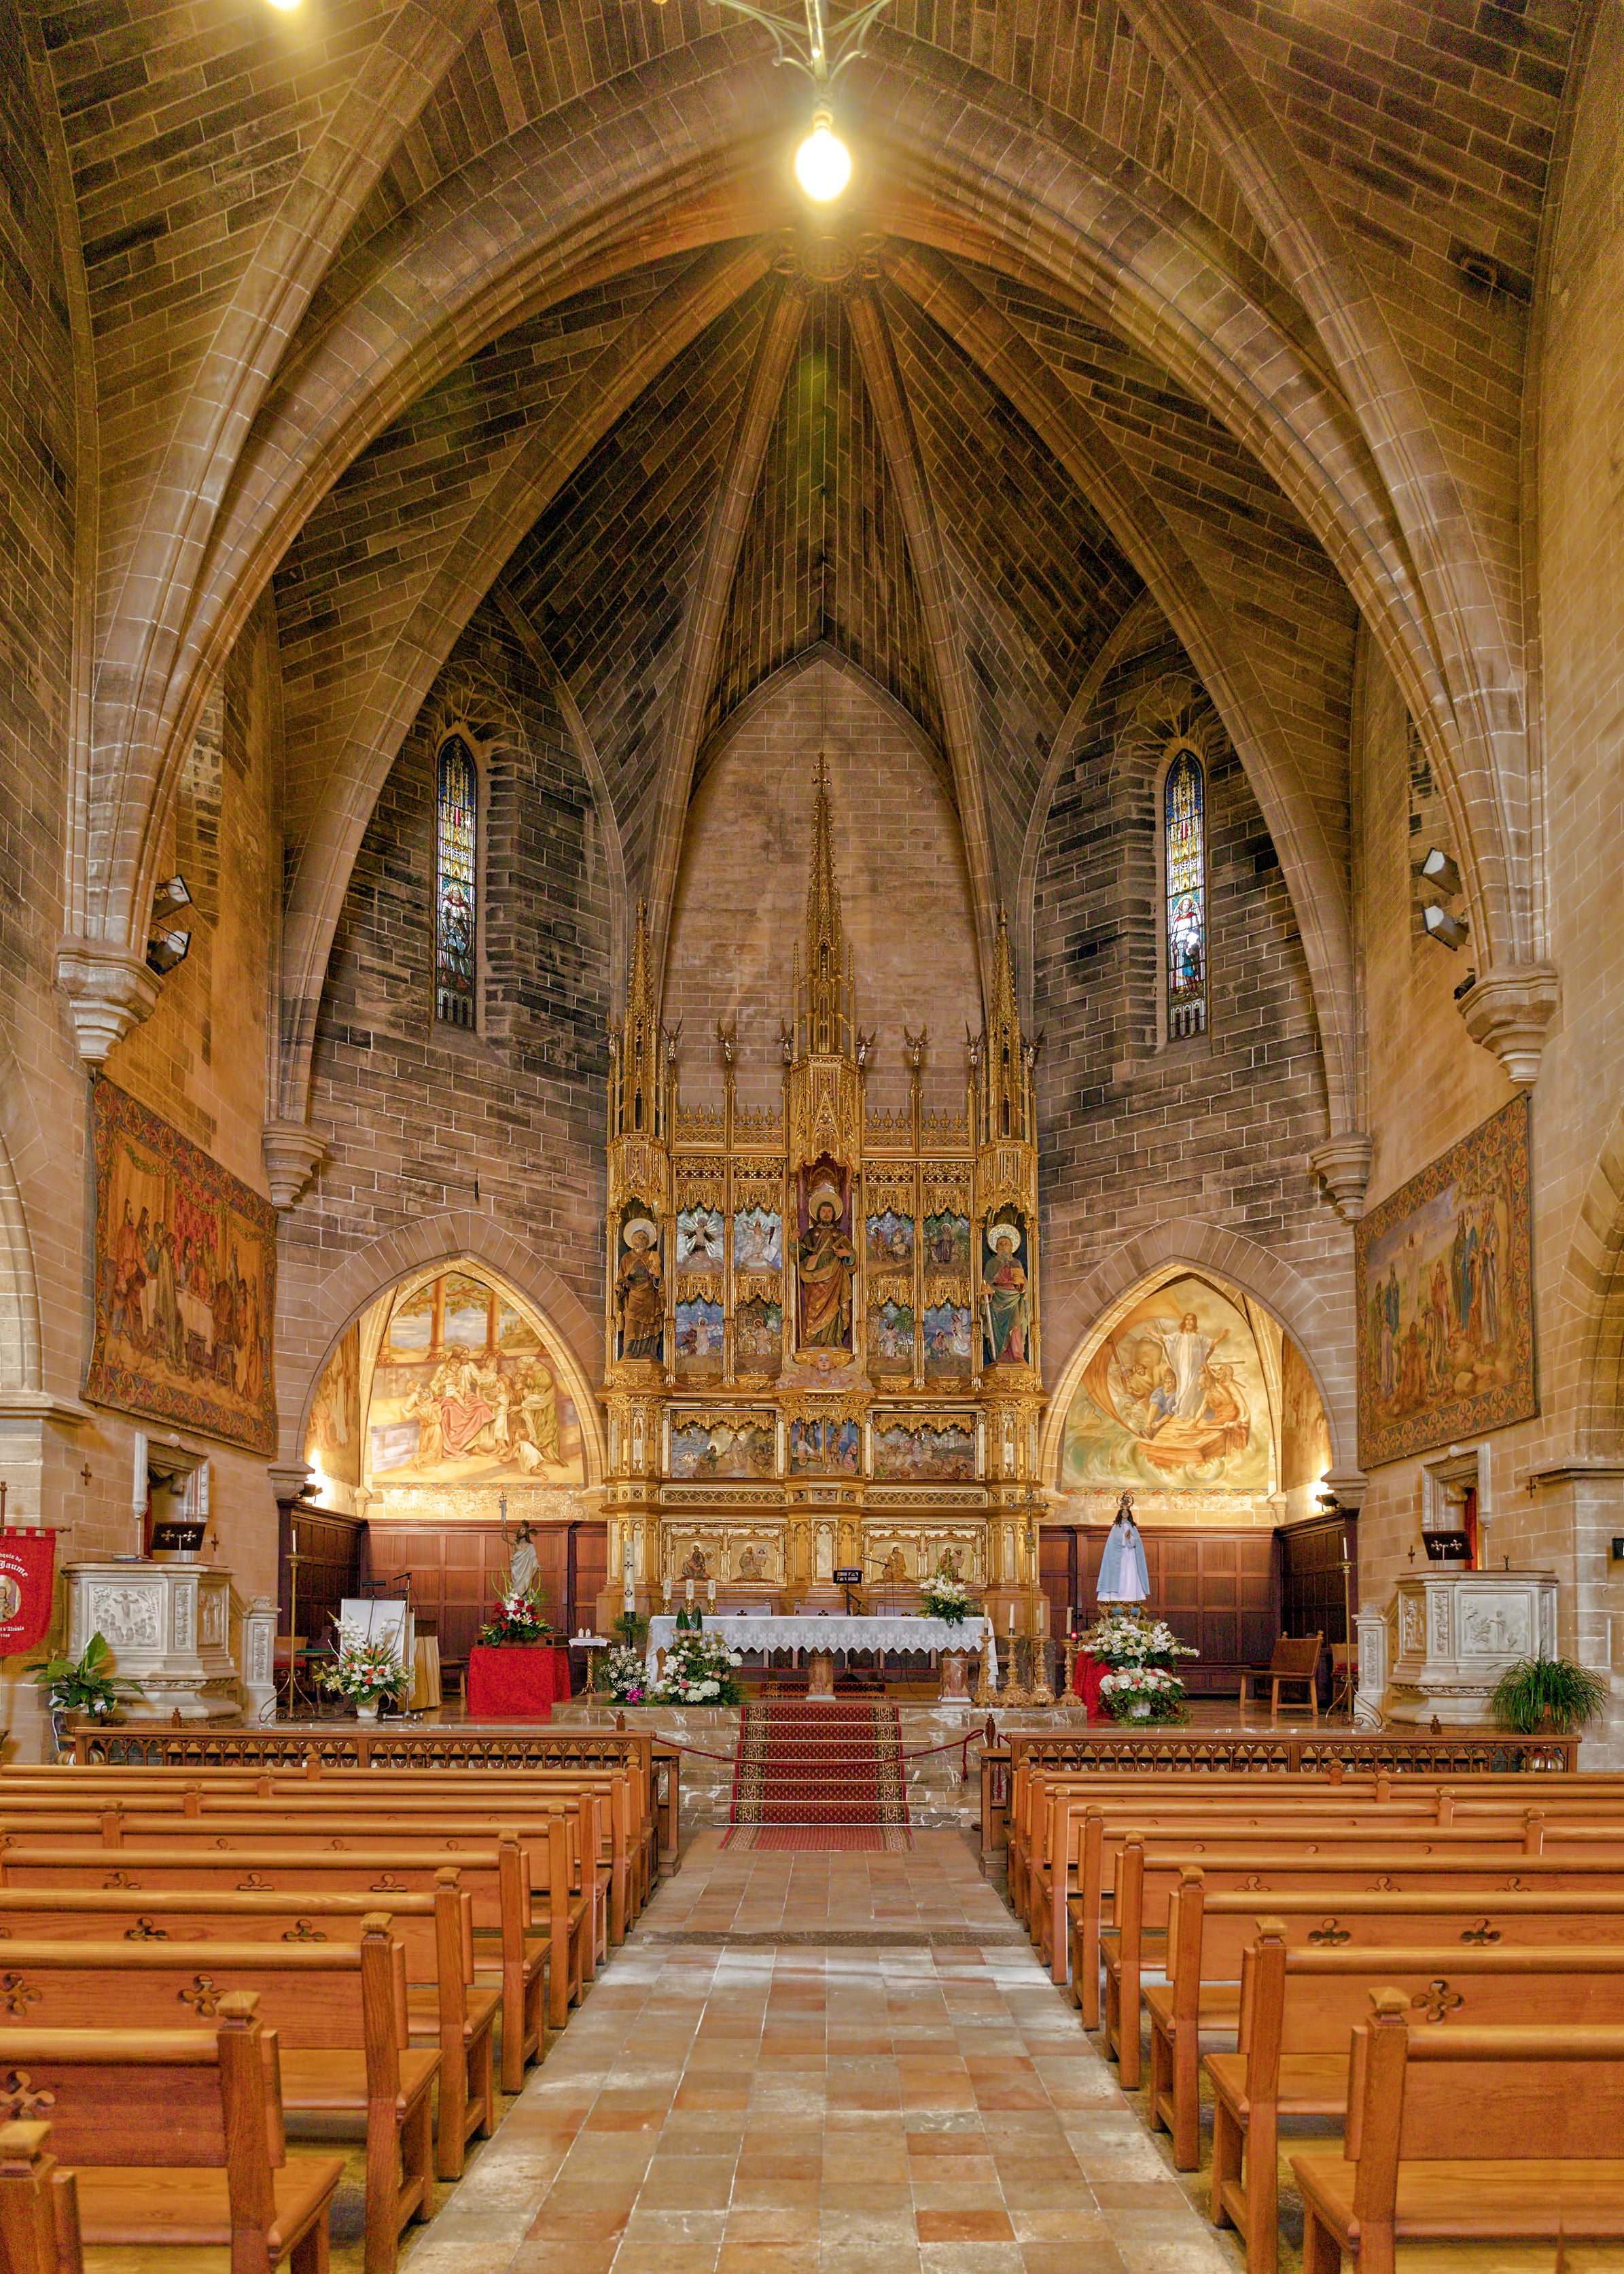 7. Visit the Church of St. Jaume - The Church of St Jaume, Alcudia, Mallorca